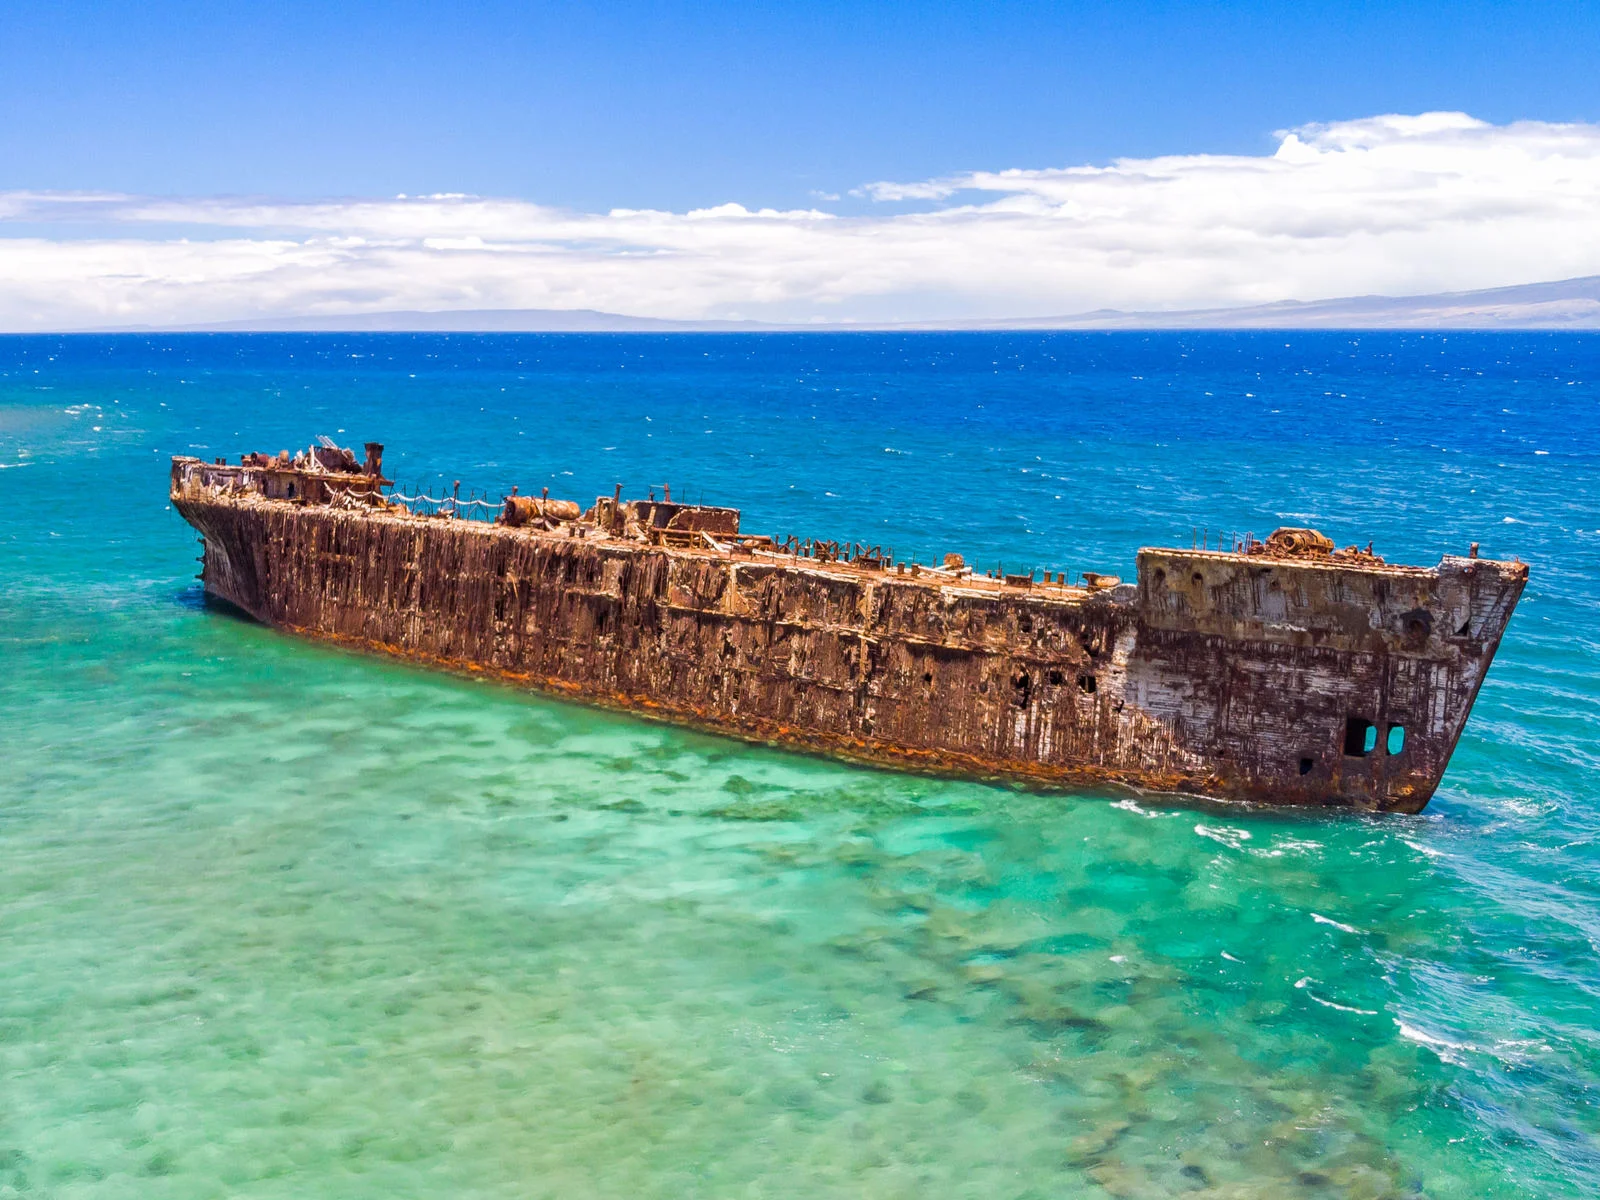 A corroding rusty old abandoned ship off the coast of crystal clear Shipwreck Beach, one of the best beaches in Kauai